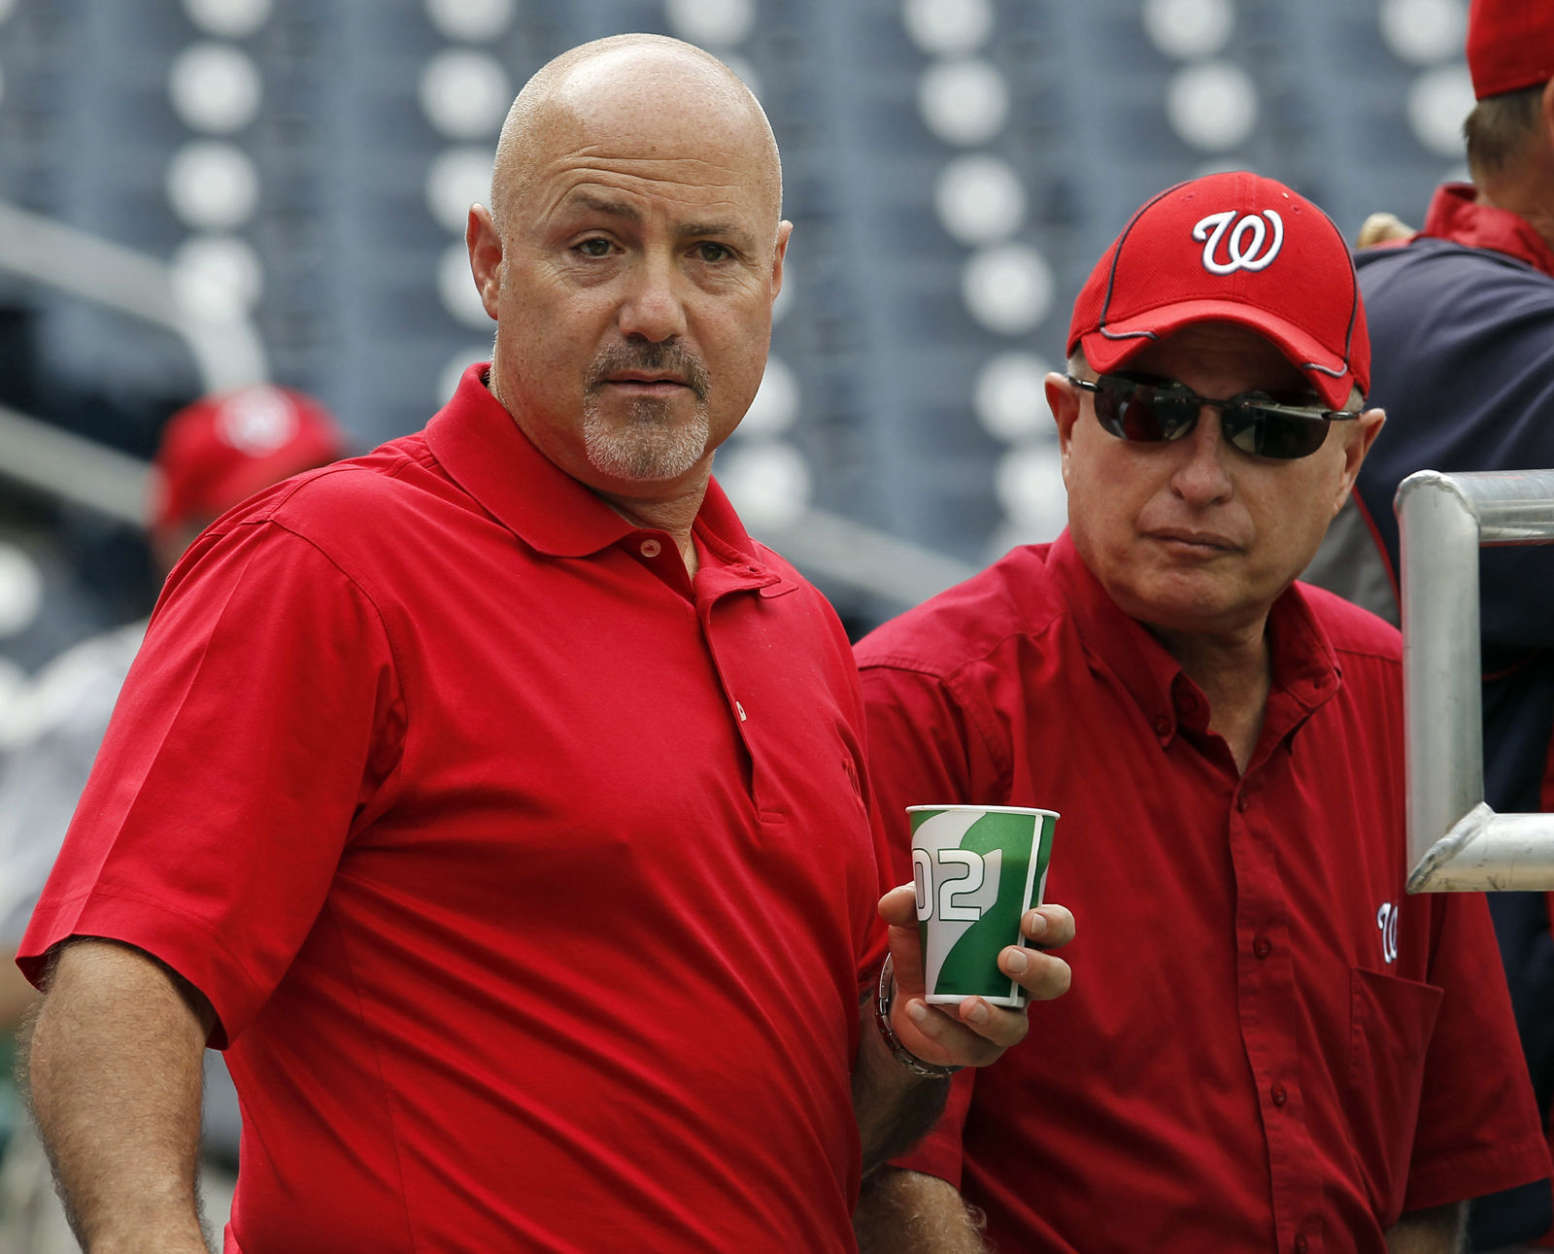 Washington Nationals general manager Mike Rizzo, left, stands with owner Mark Lerner before a baseball game with the Atlanta Braves at Nationals Park on Monday, Aug. 20, 2012, in Washington. (AP Photo/Alex Brandon)